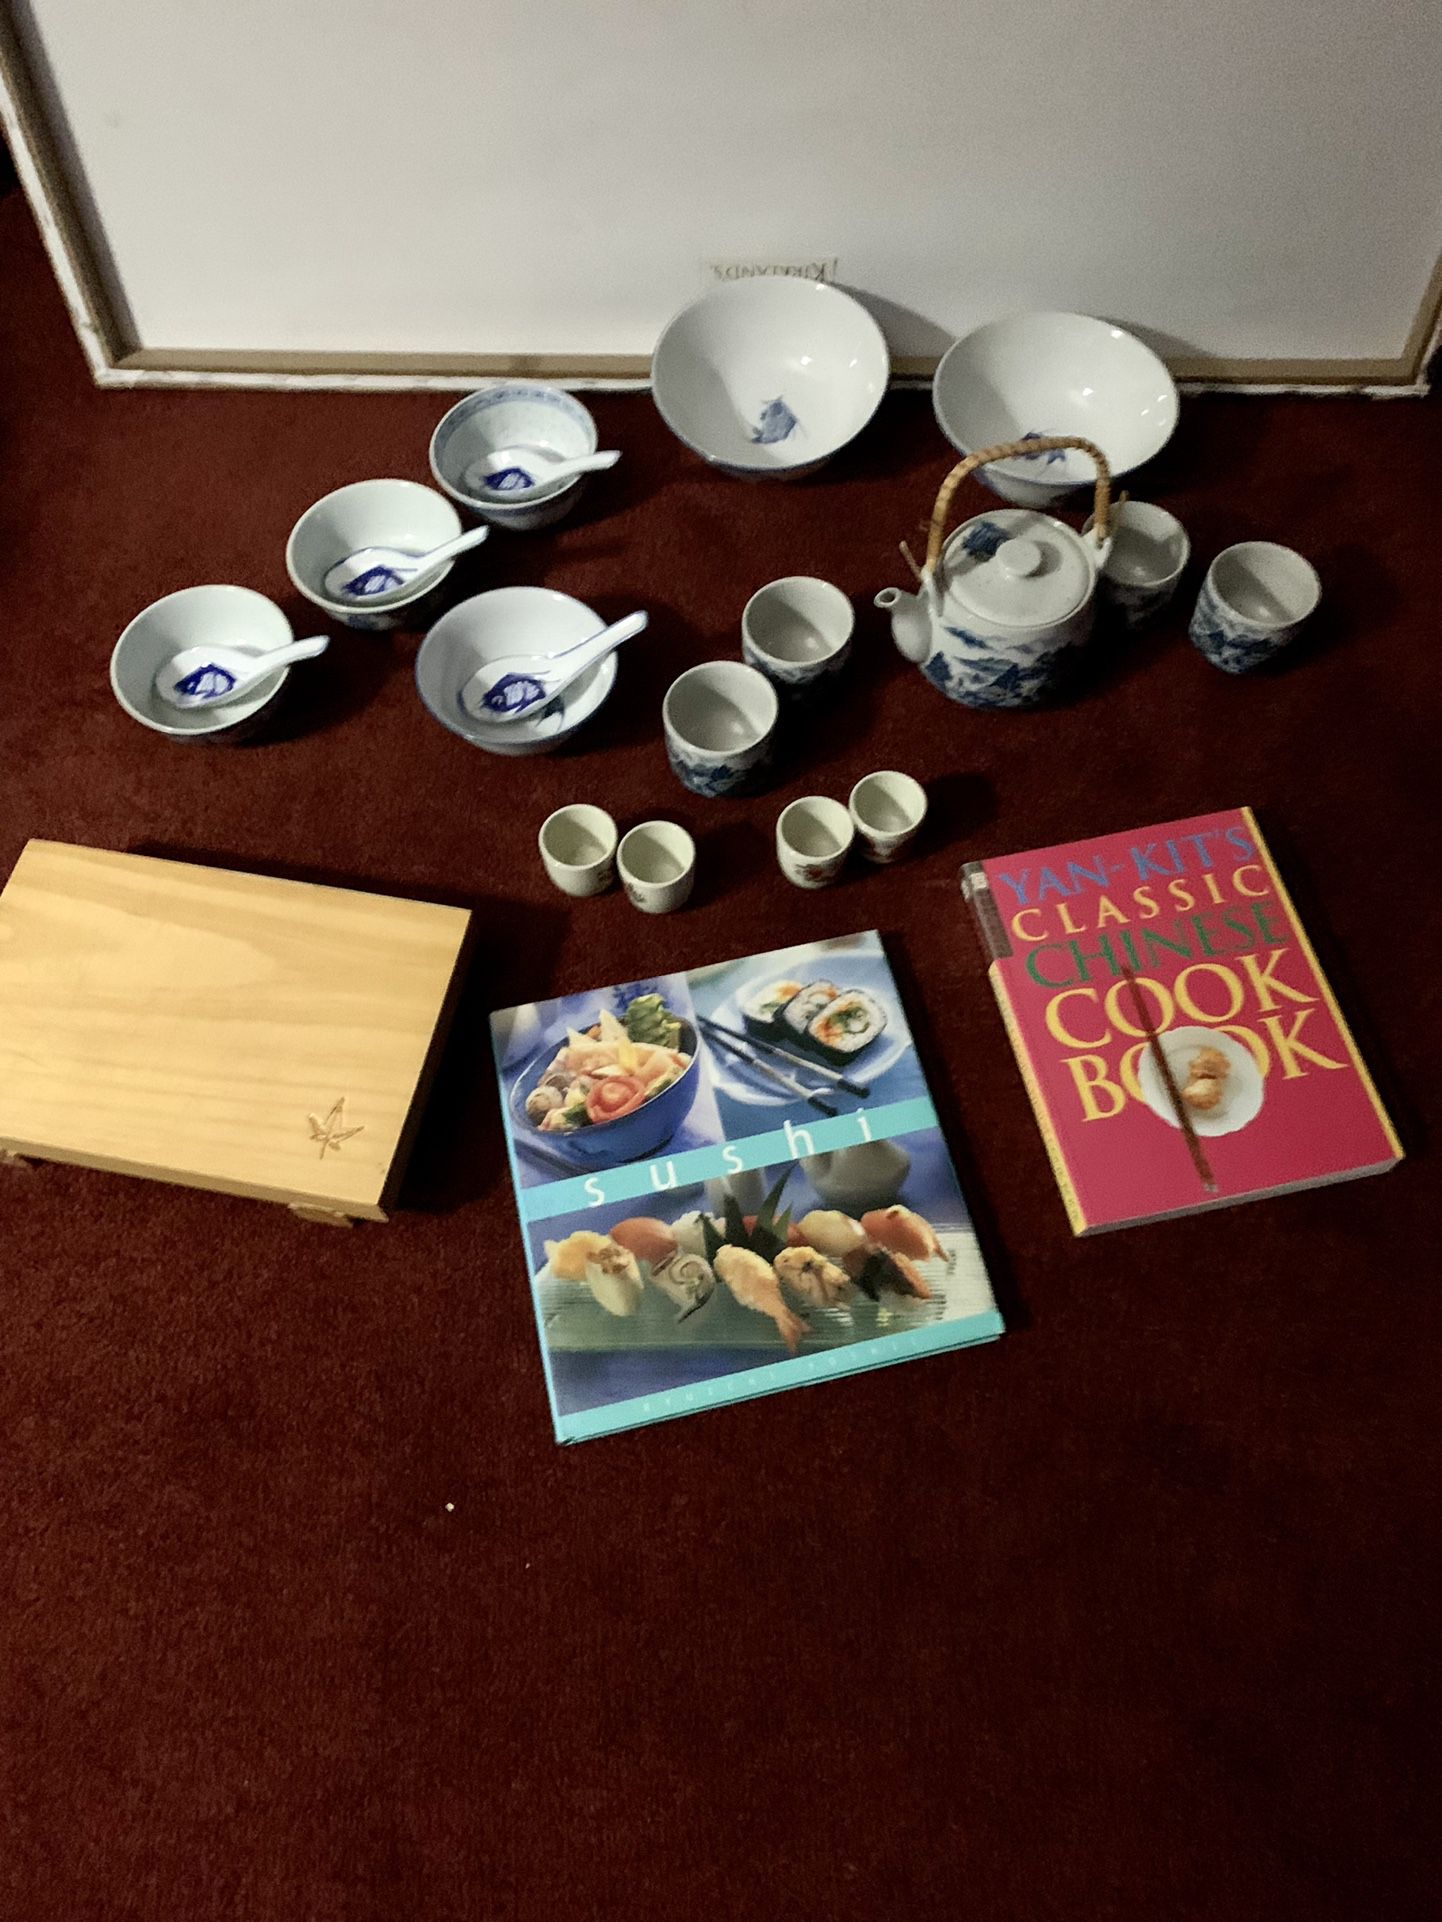 Japanese  Sushi Cookbook, Chinese cookbook .with Bowls and Tea Set